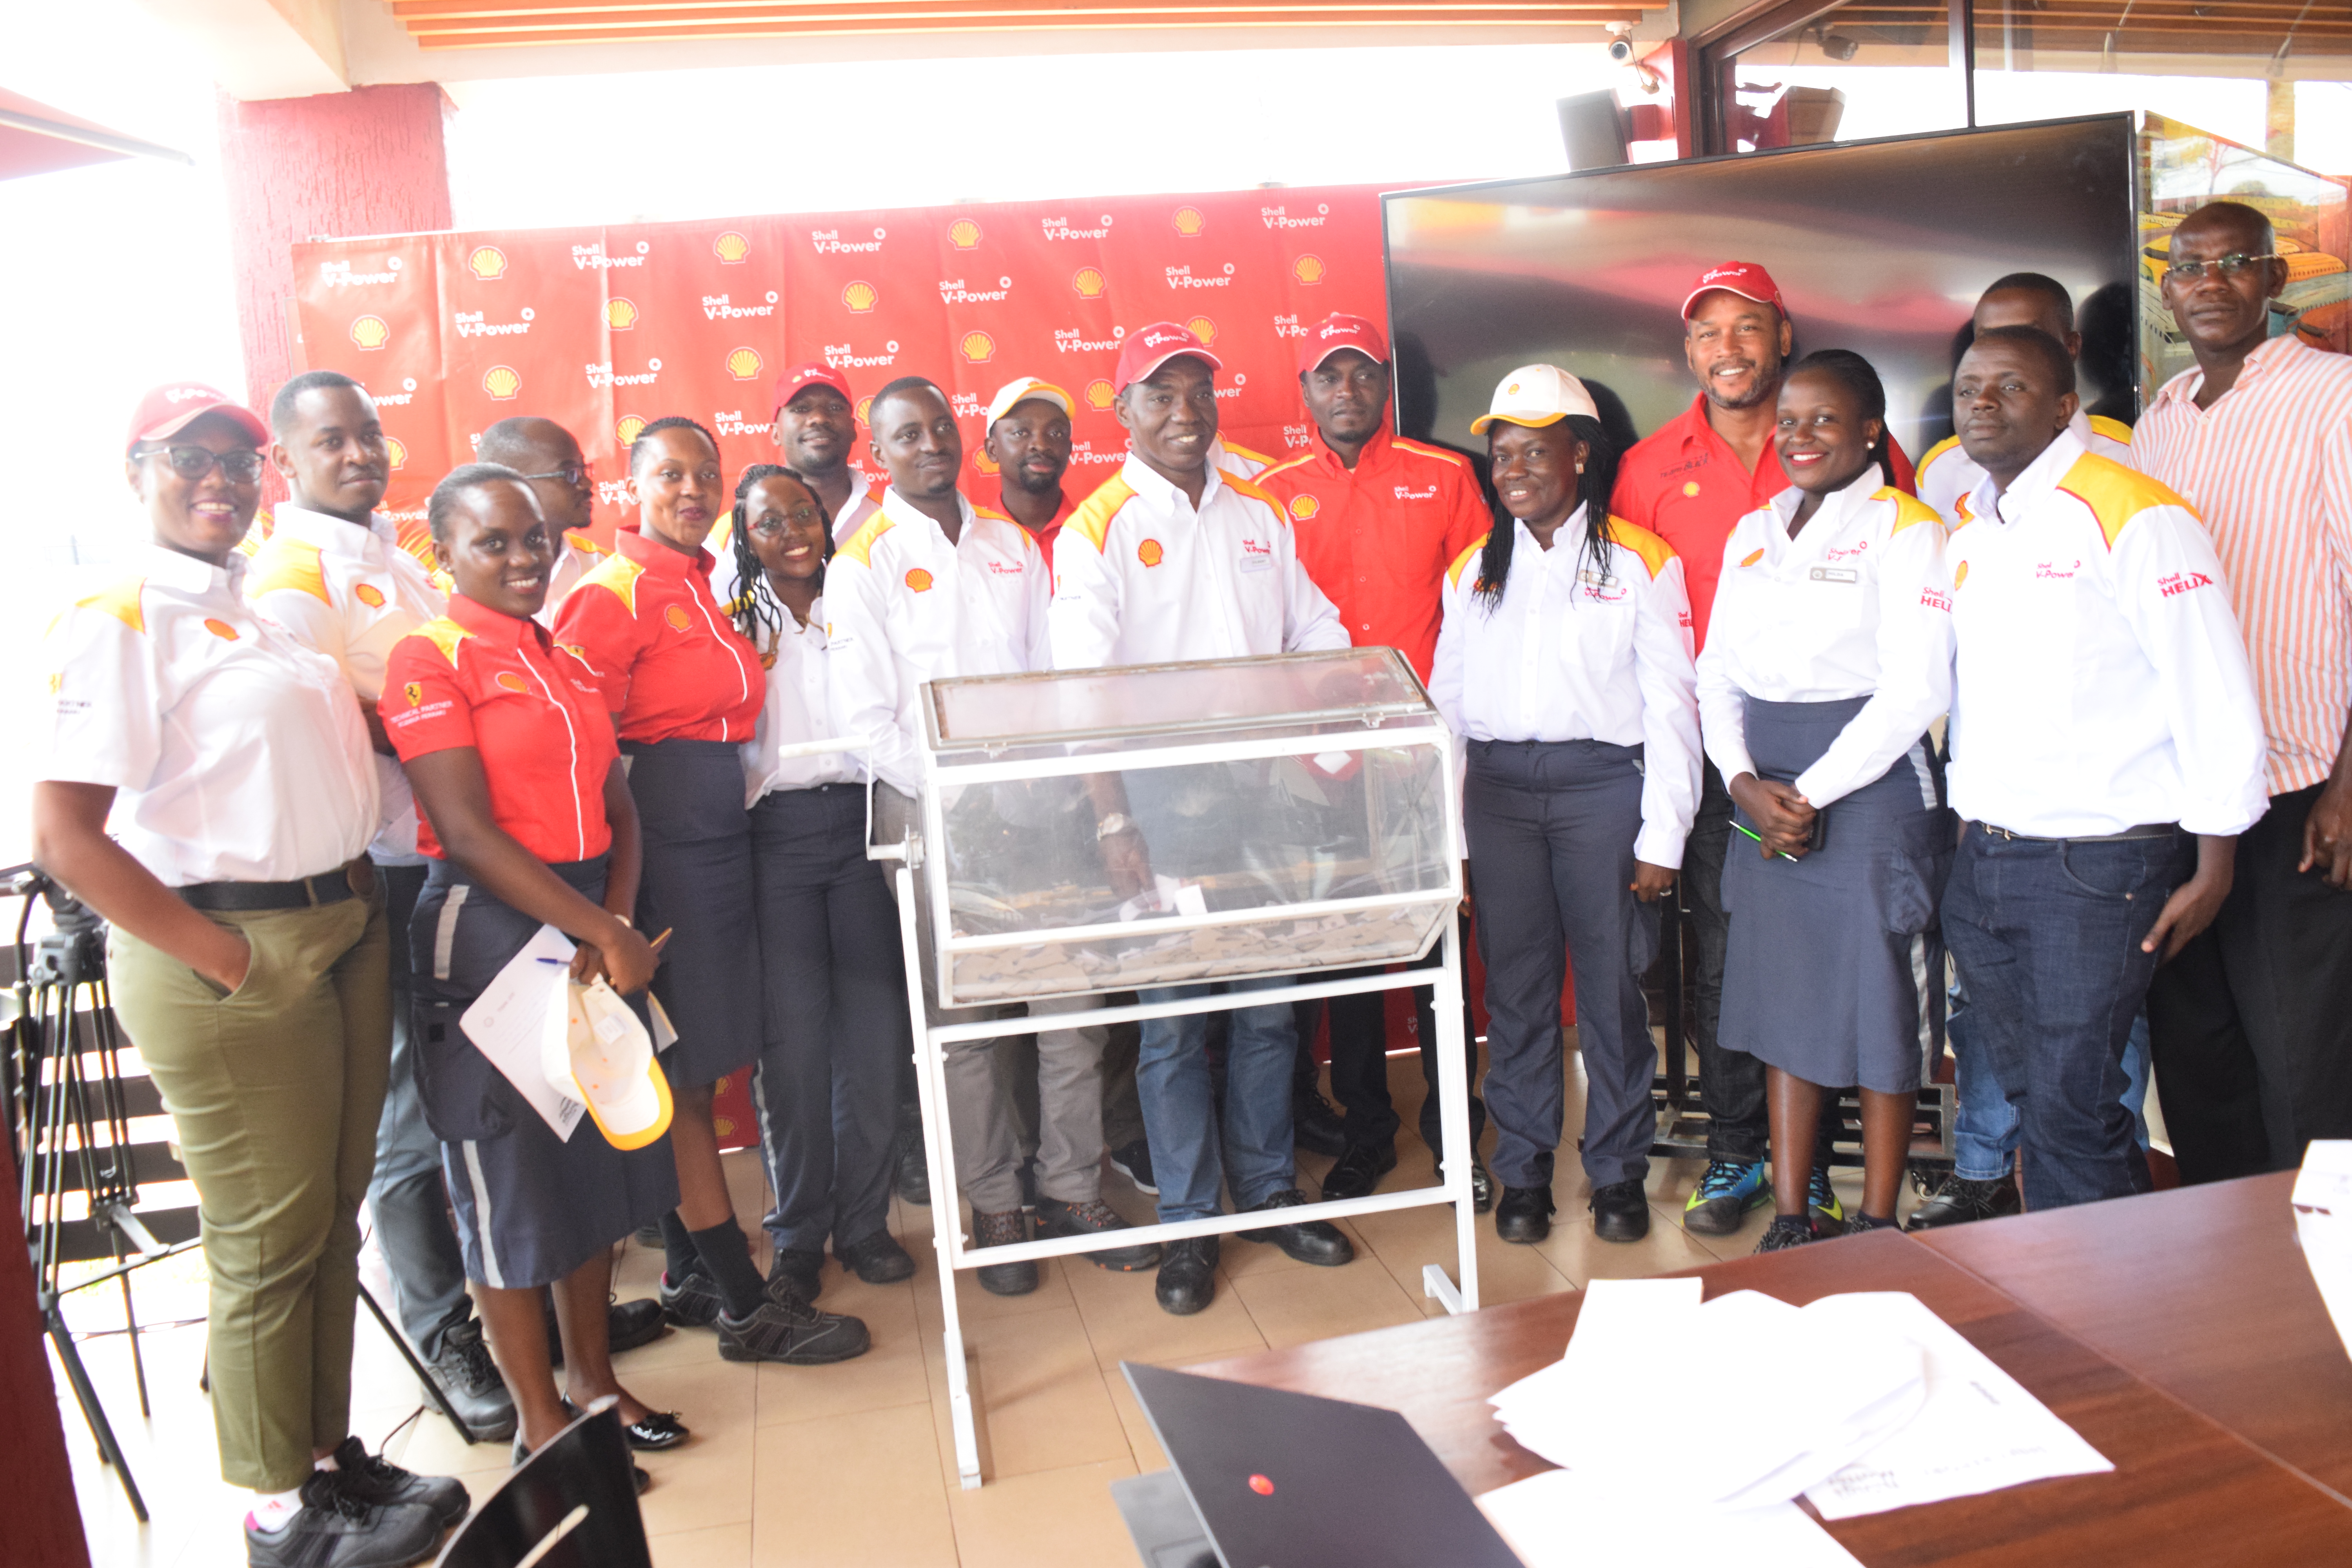 Shell V-Power Club Winners to Visit Home of Ferrari in Italy